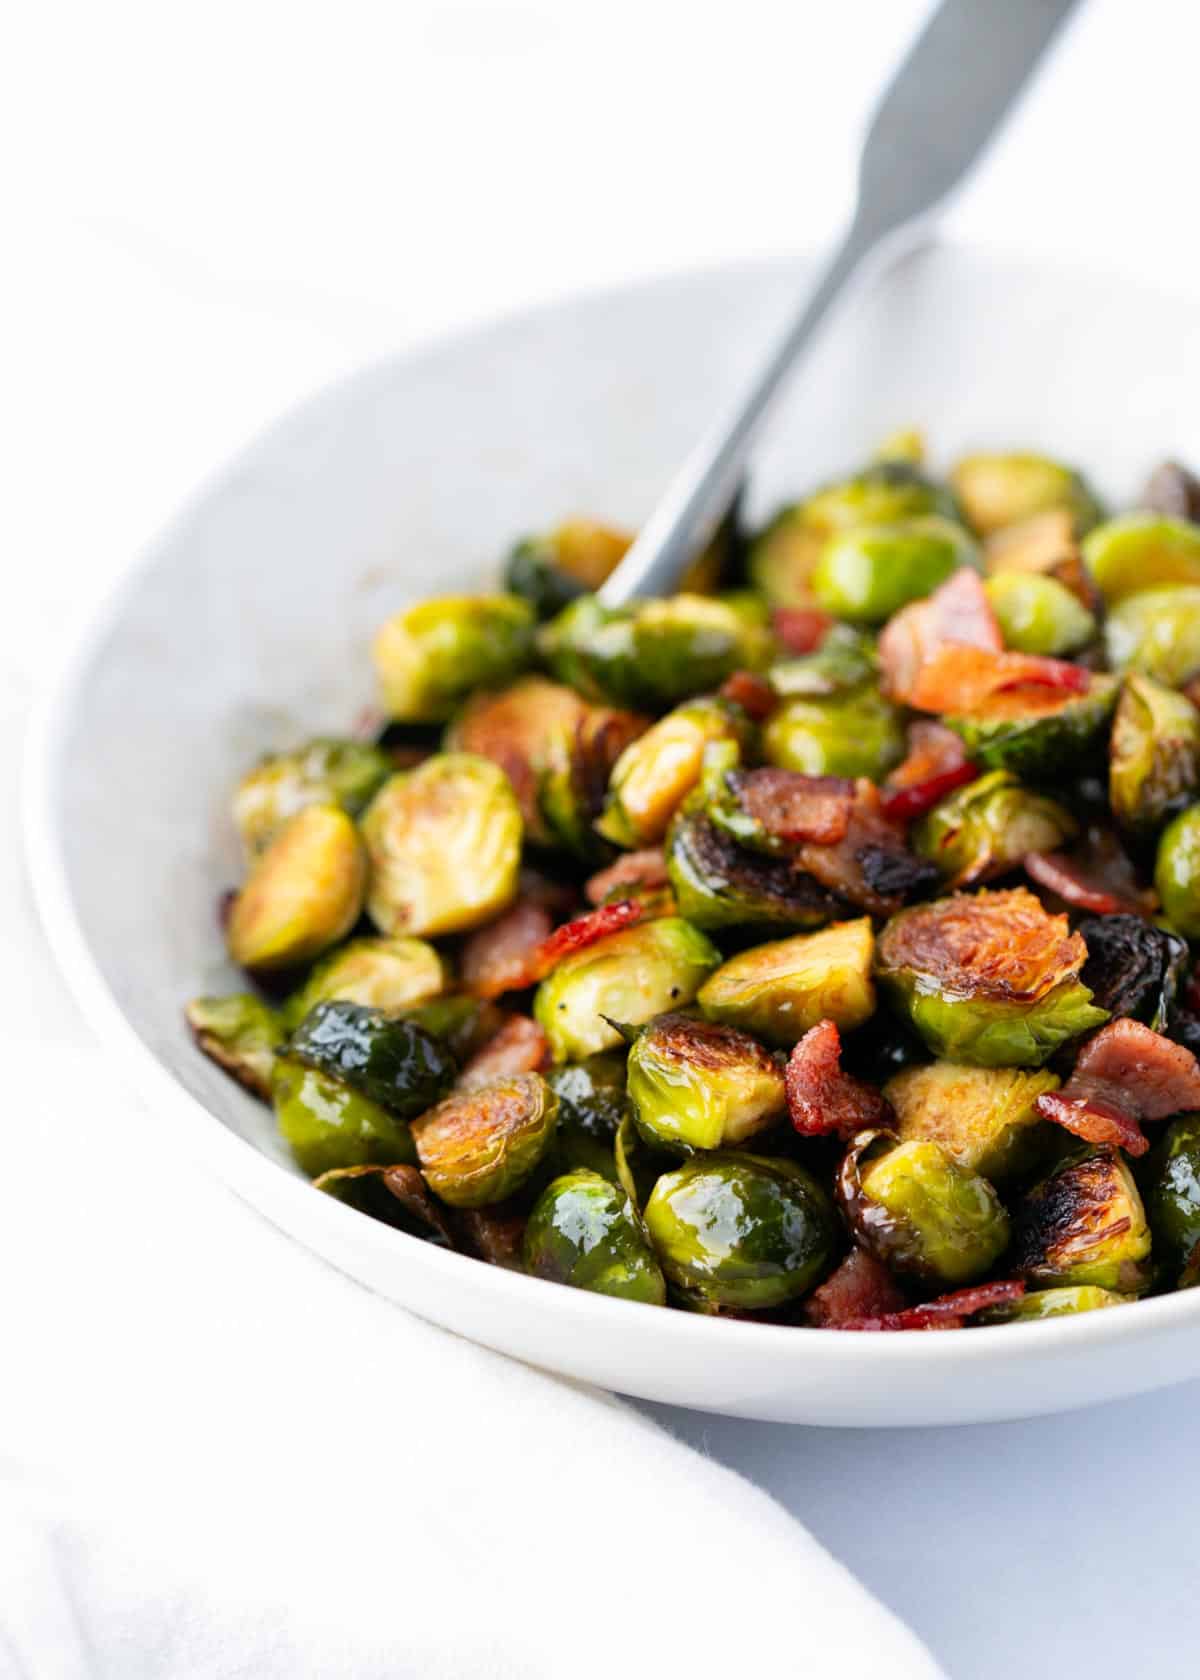 Brussel sprouts with bacon in a bowl.